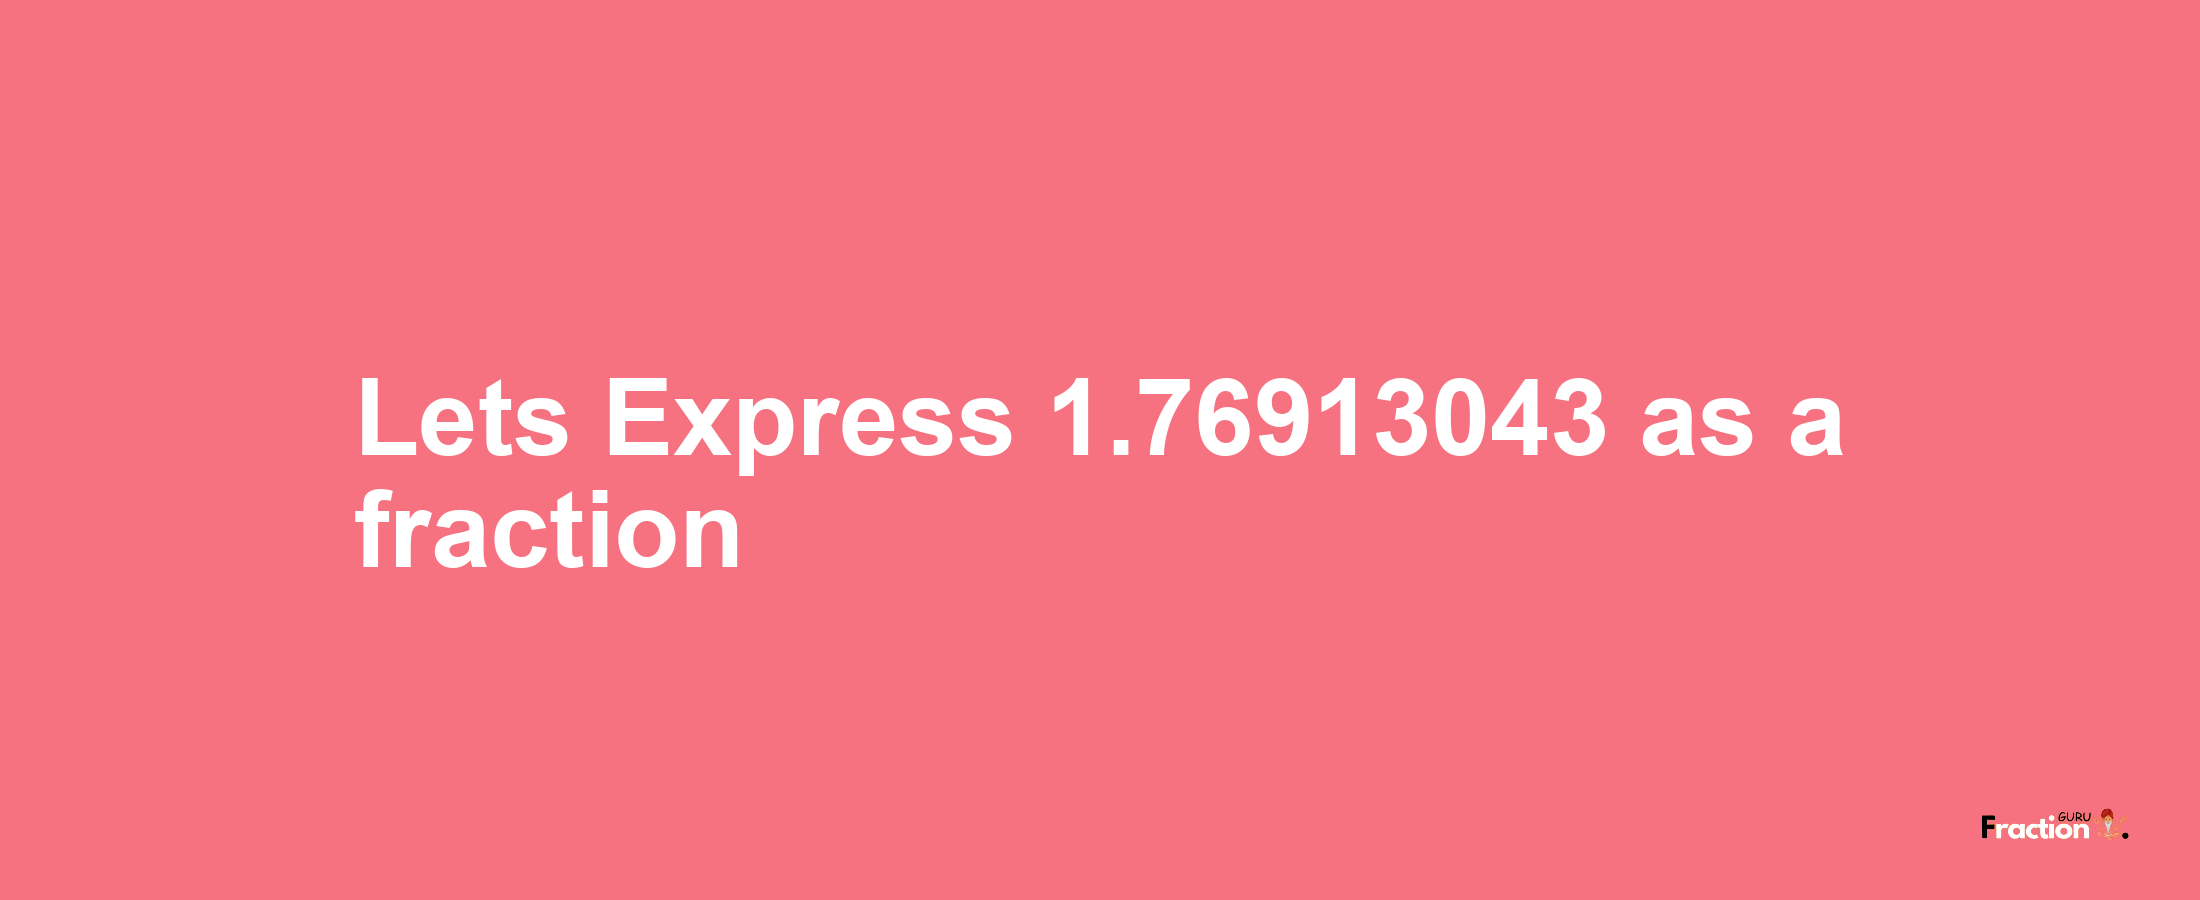 Lets Express 1.76913043 as afraction